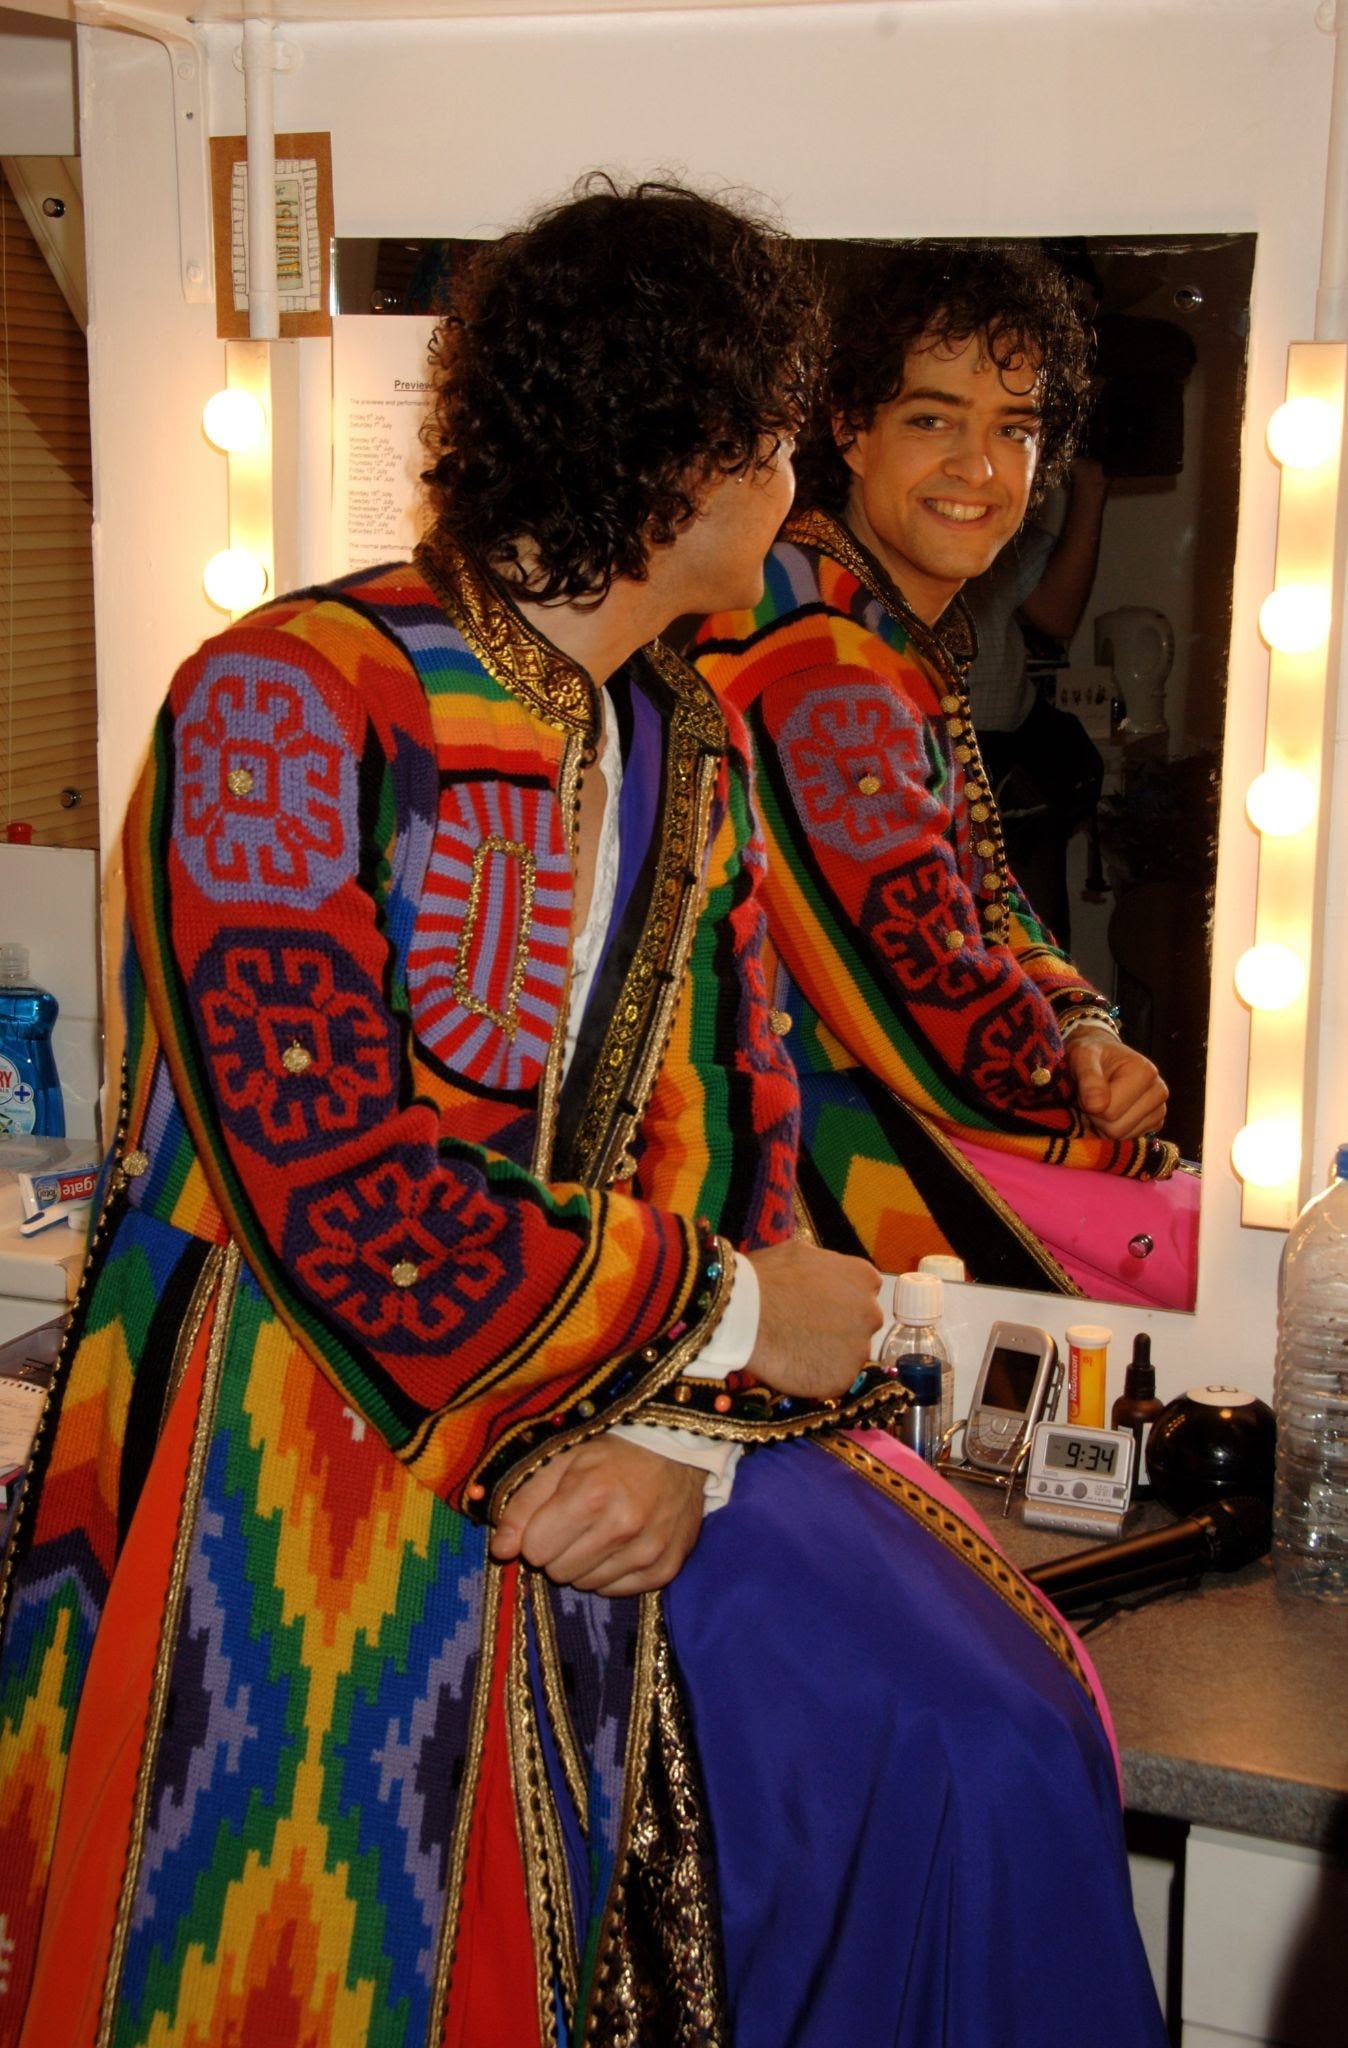 Photo of an actor from Joseph and the Amazing Technicolor Dreamcoat, with curly hair, looking at himself in the mirror, apparently enjoying the view